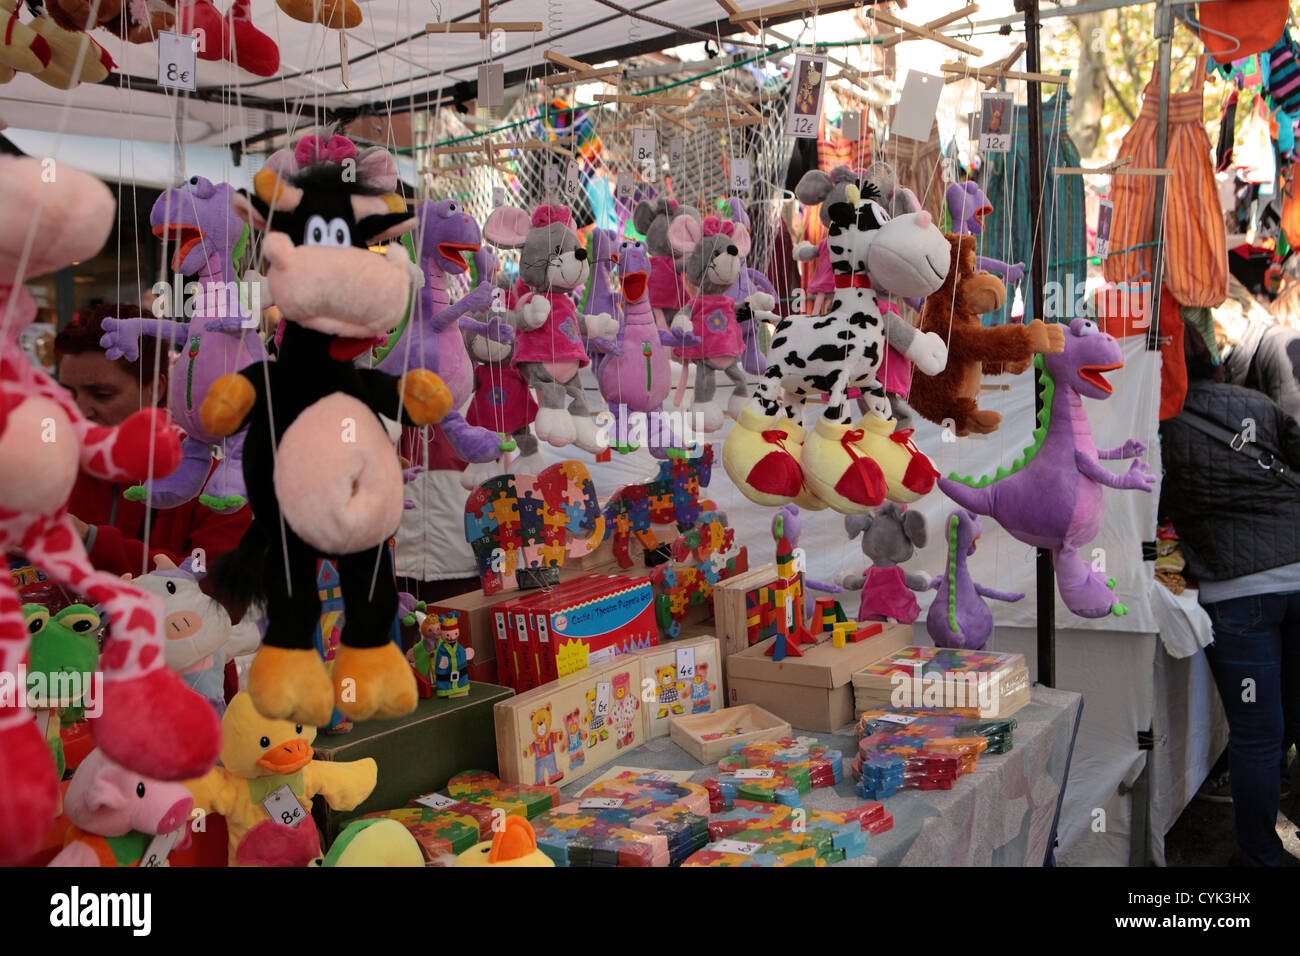 Puppets and children's toys for sale street market stall, El Rastro, Madrid, Spain Stock Photo